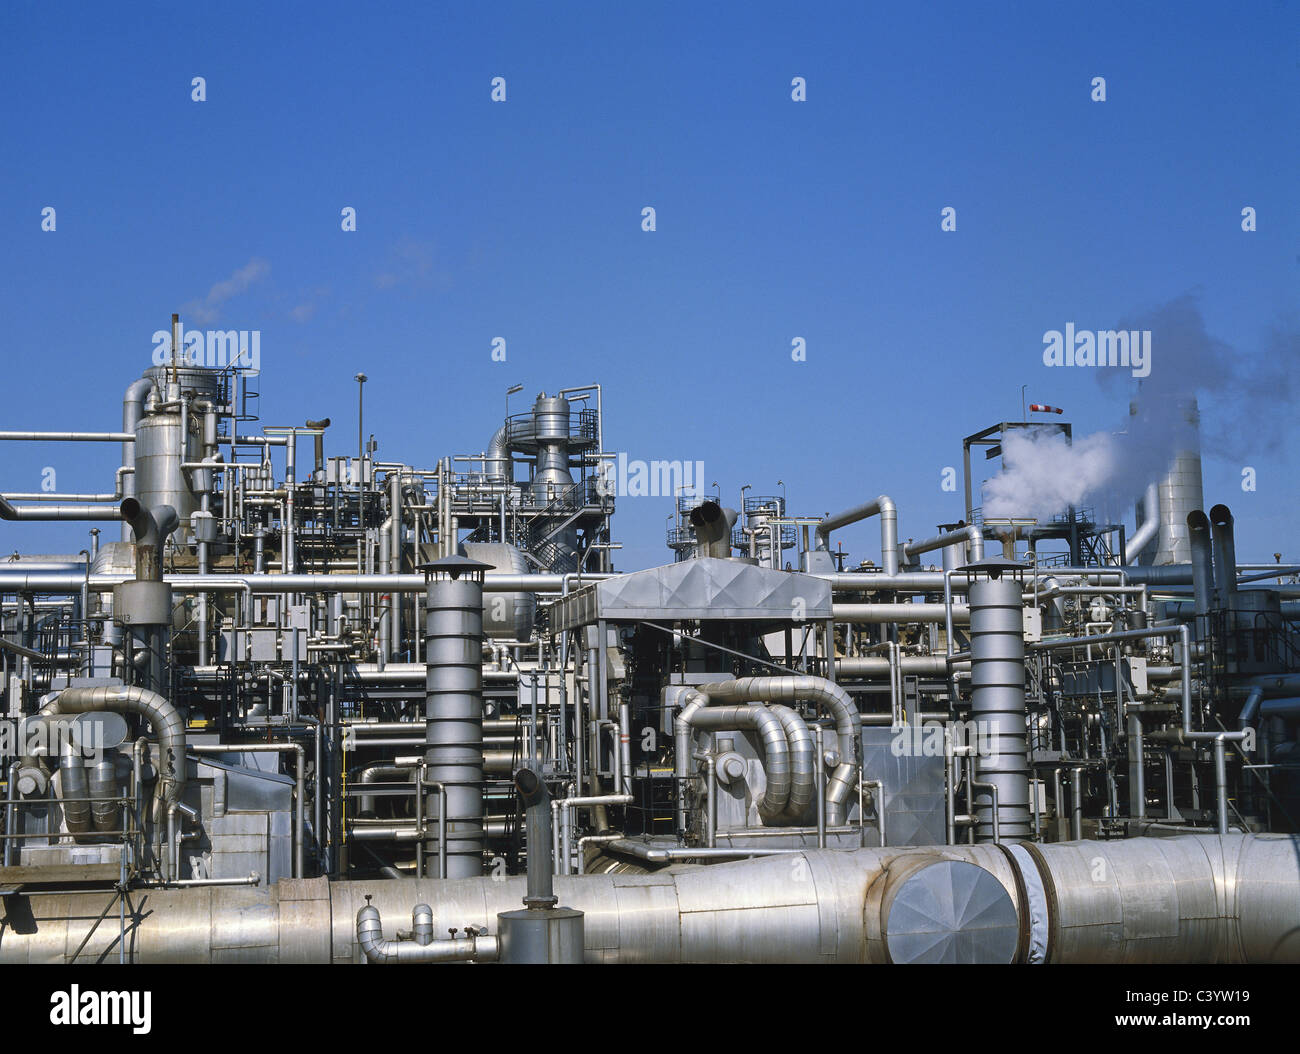 Architecture, Building, Chemical, Chemistry, Complex, Complexity, Economy, Facility, Factories, Factory, Germany, Industrial, In Stock Photo